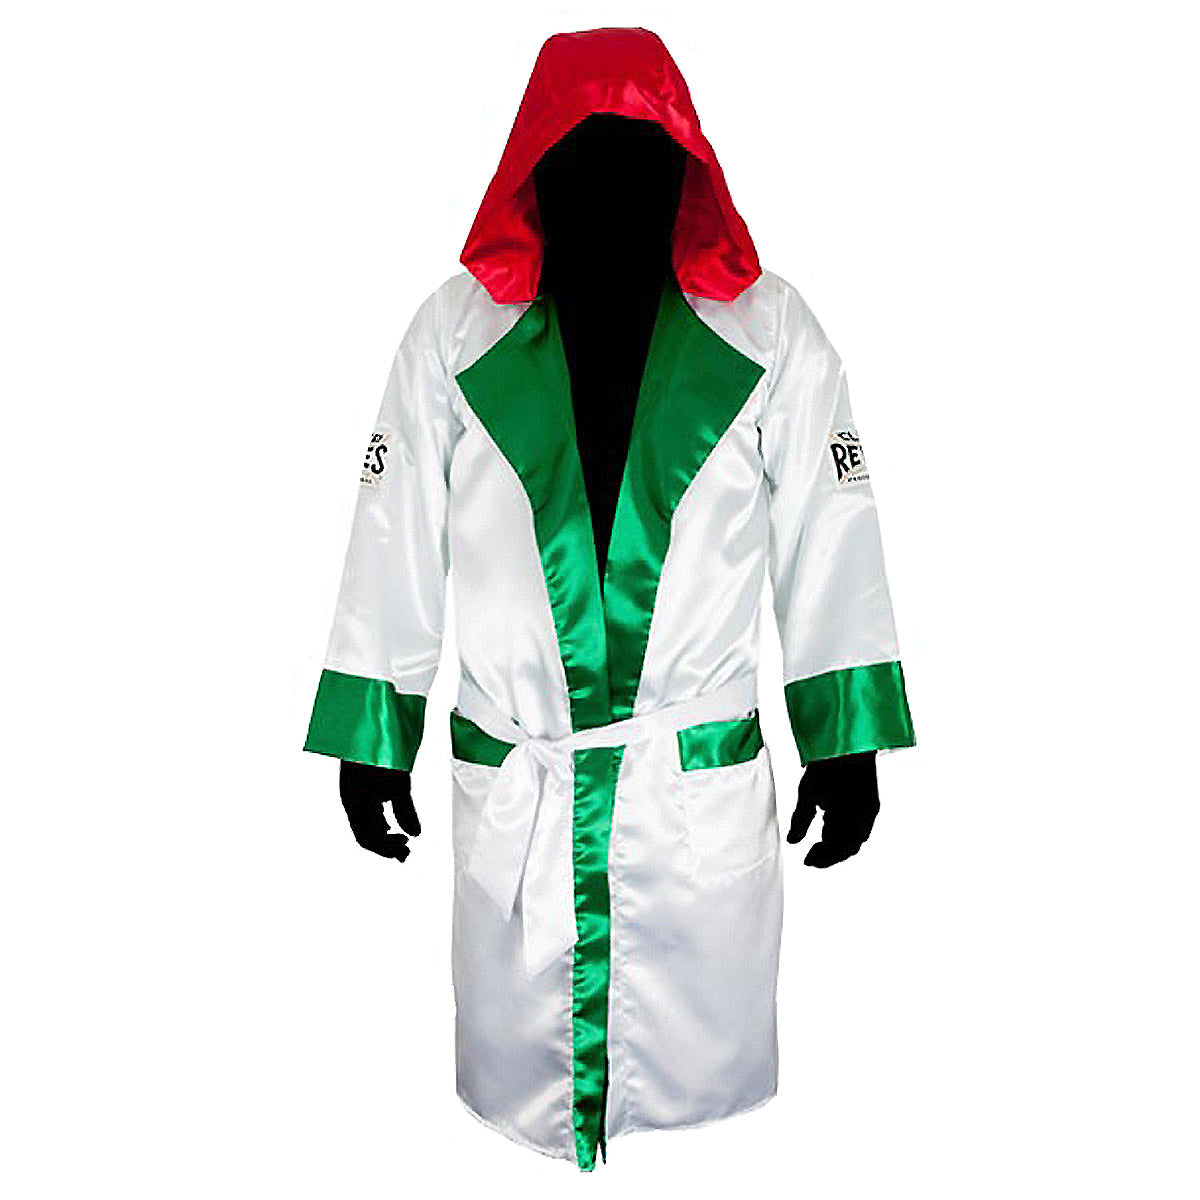 Cleto Reyes Satin Boxing Robe with Hood - Large - Mexican Flag Cleto Reyes